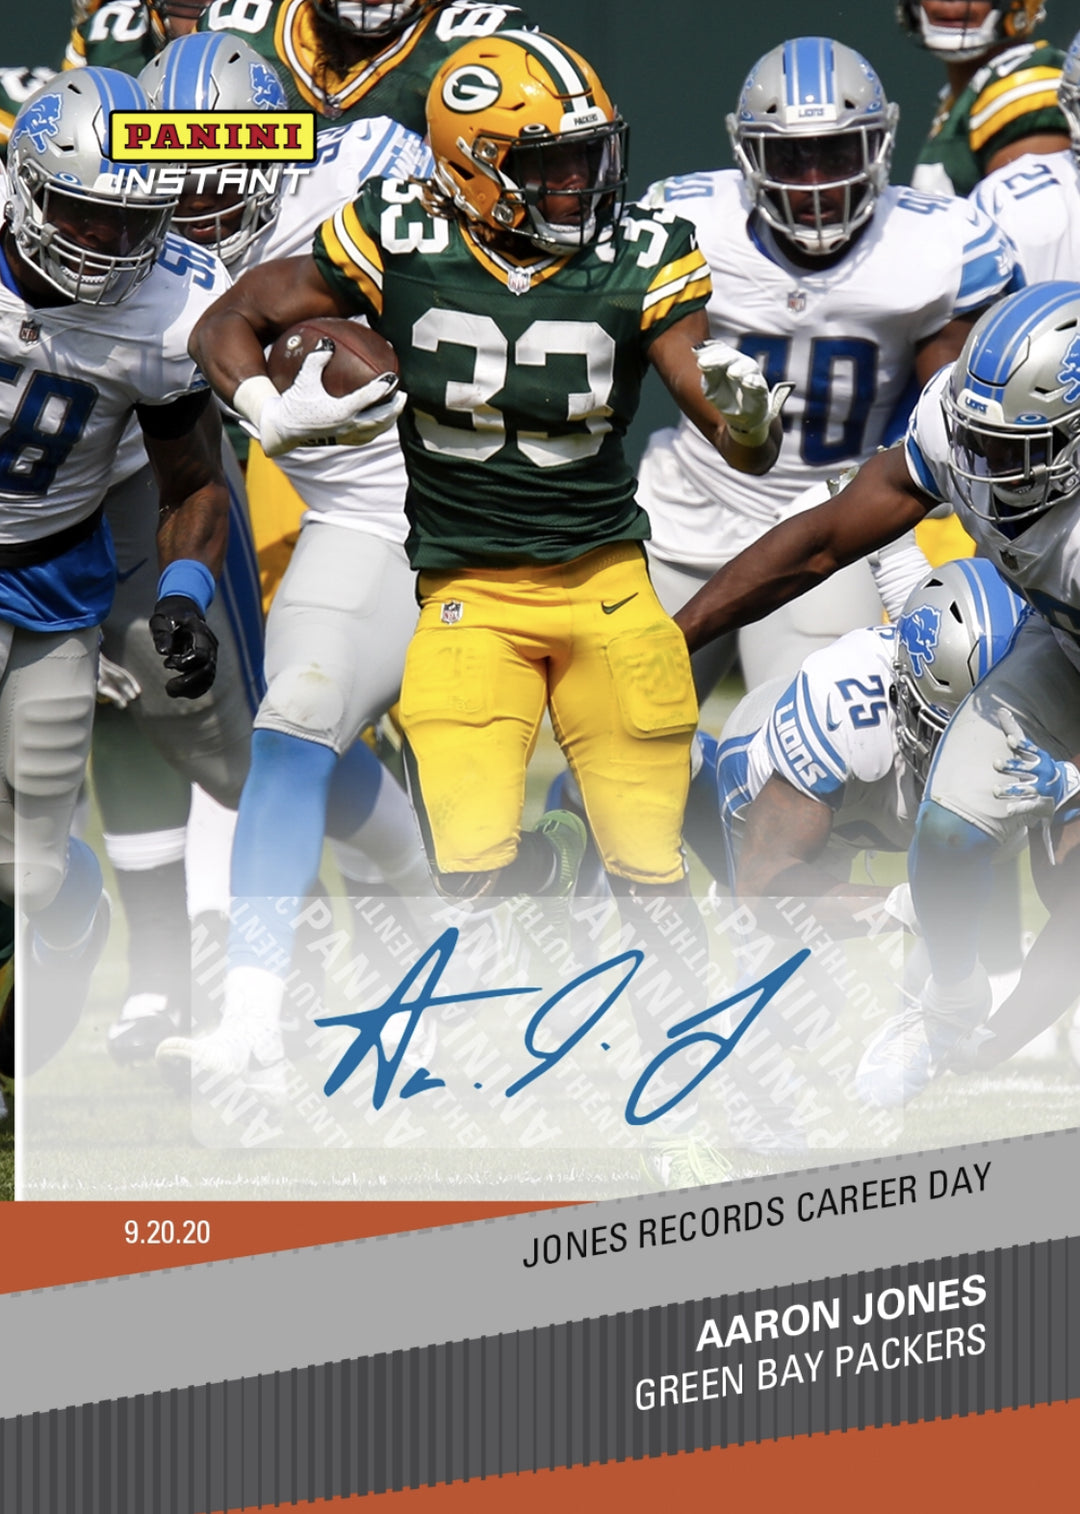 2020 AARON JONES RECORDS CAREER DAY SIGNED PANINI INSTANT PACKERS AUTO CARD #26 Image 1